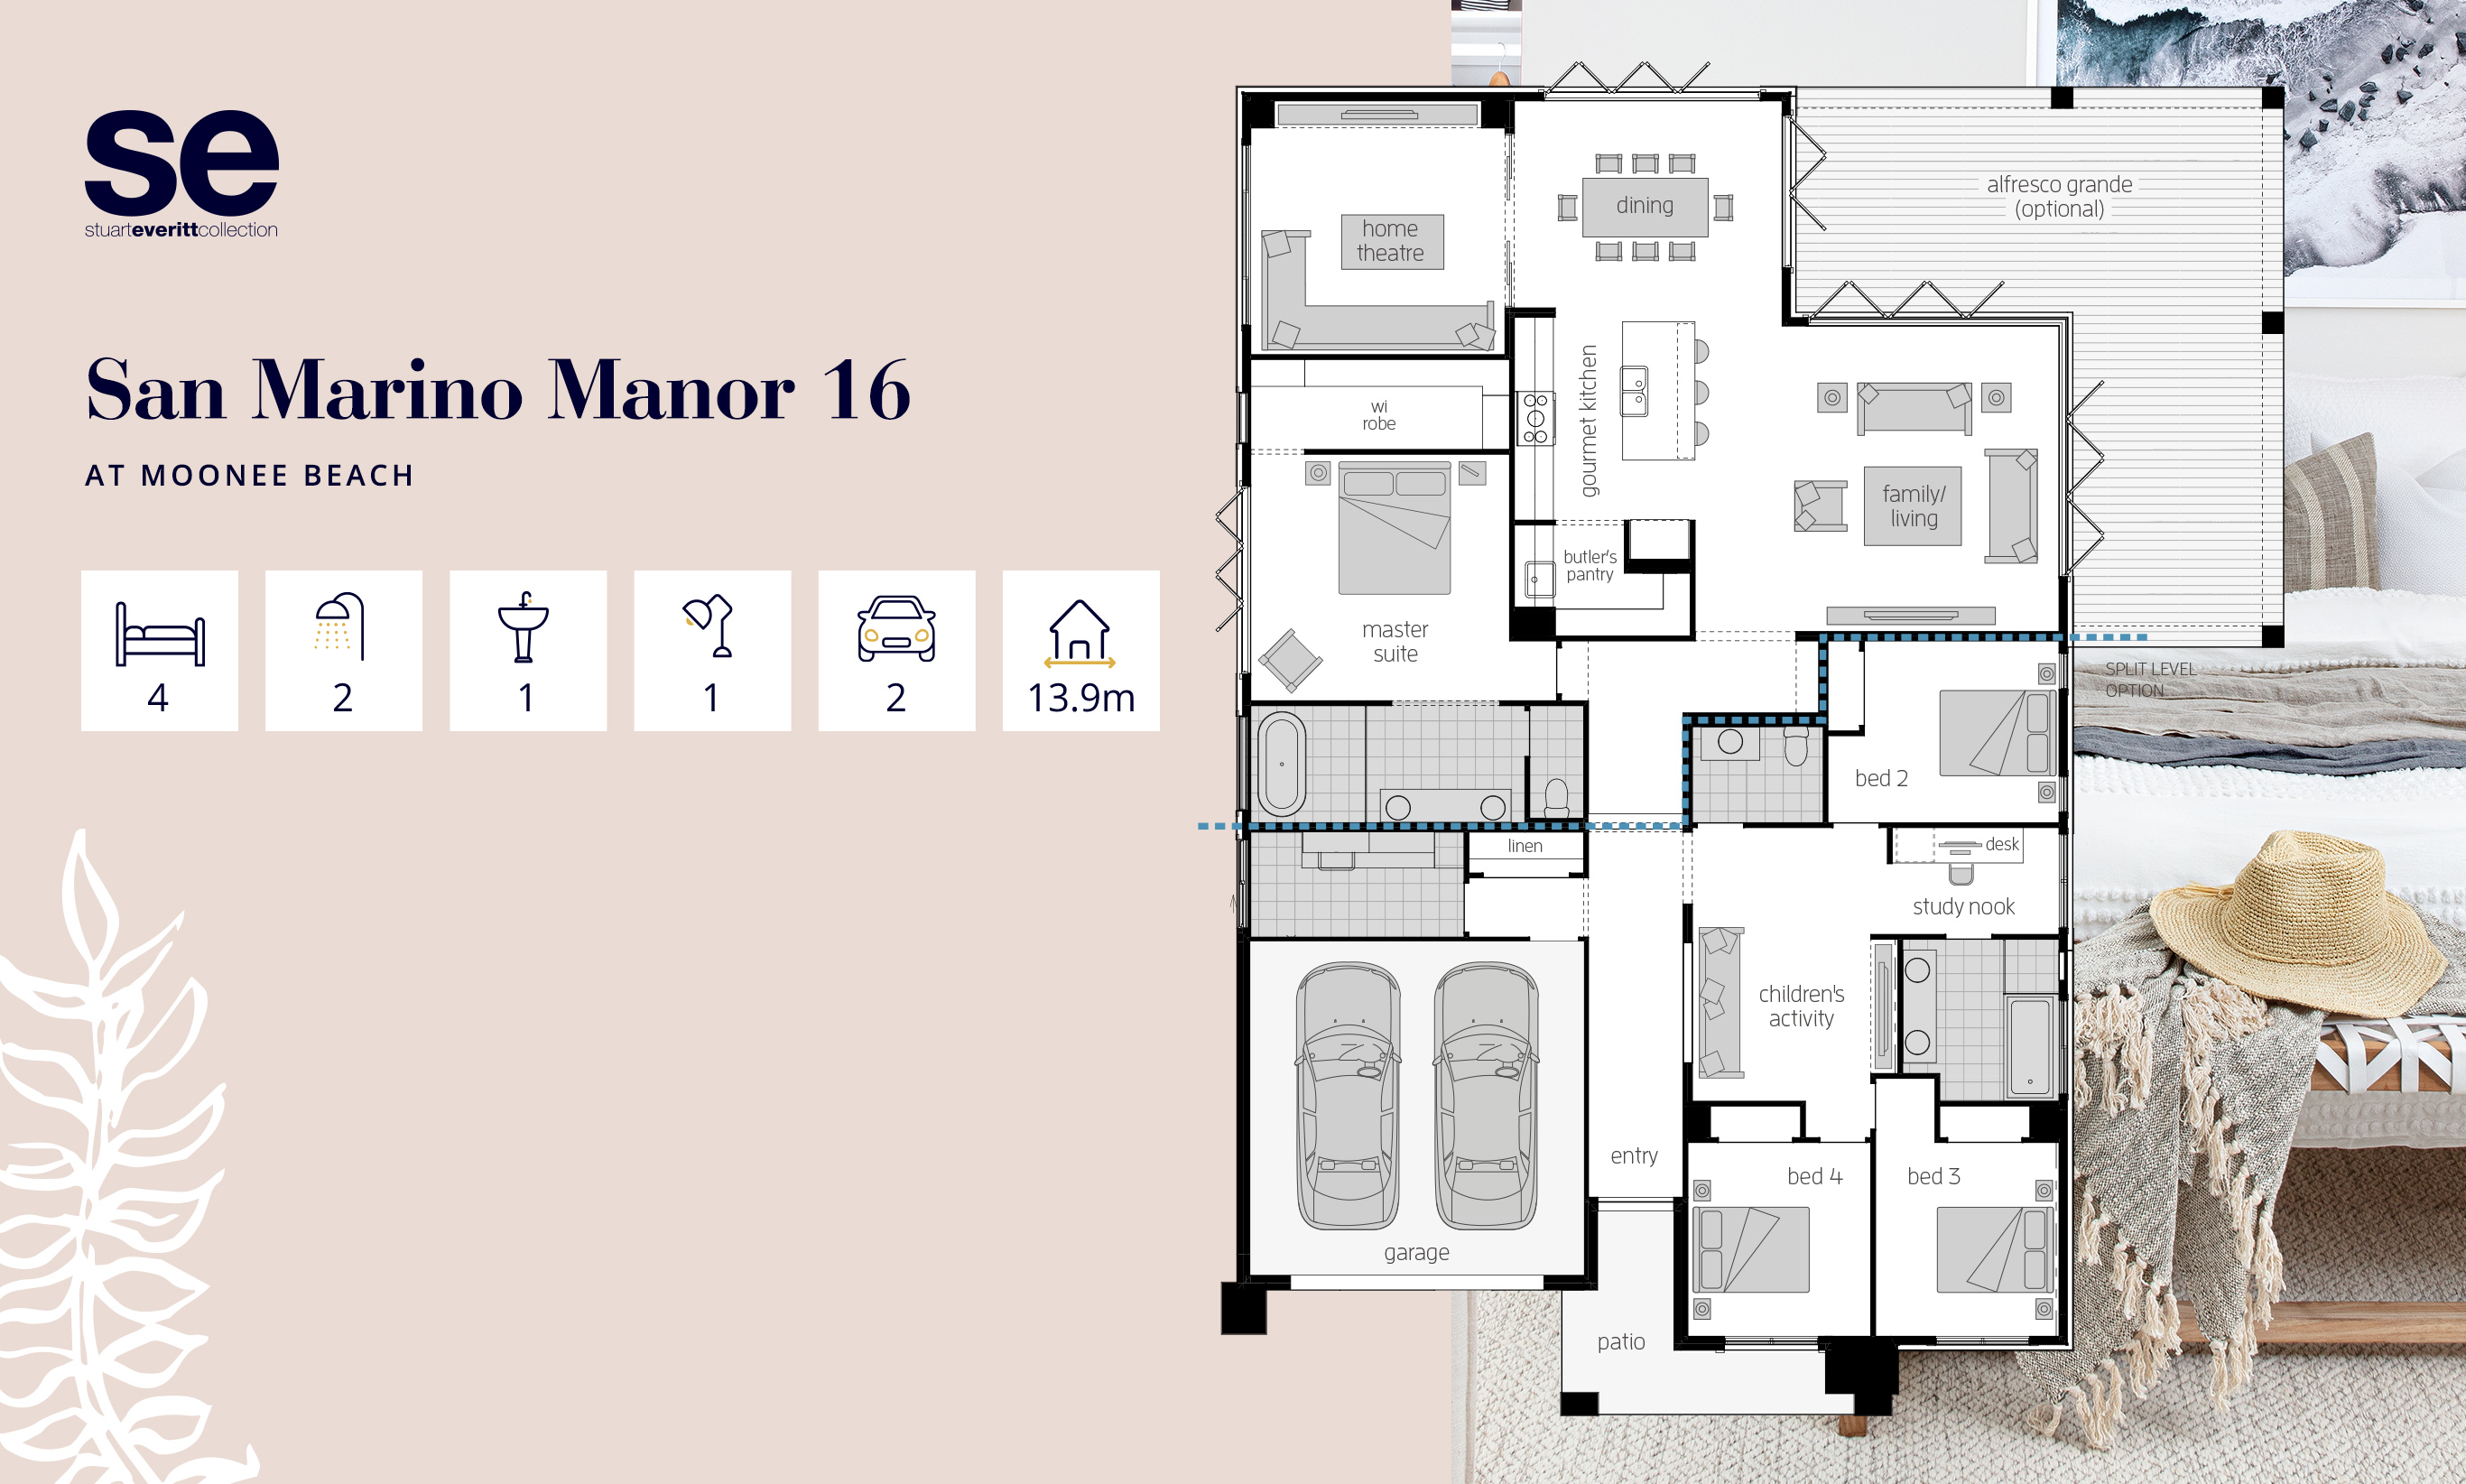 The San Marino Manor is a 4 bedroom single-storey home ideal for modern living